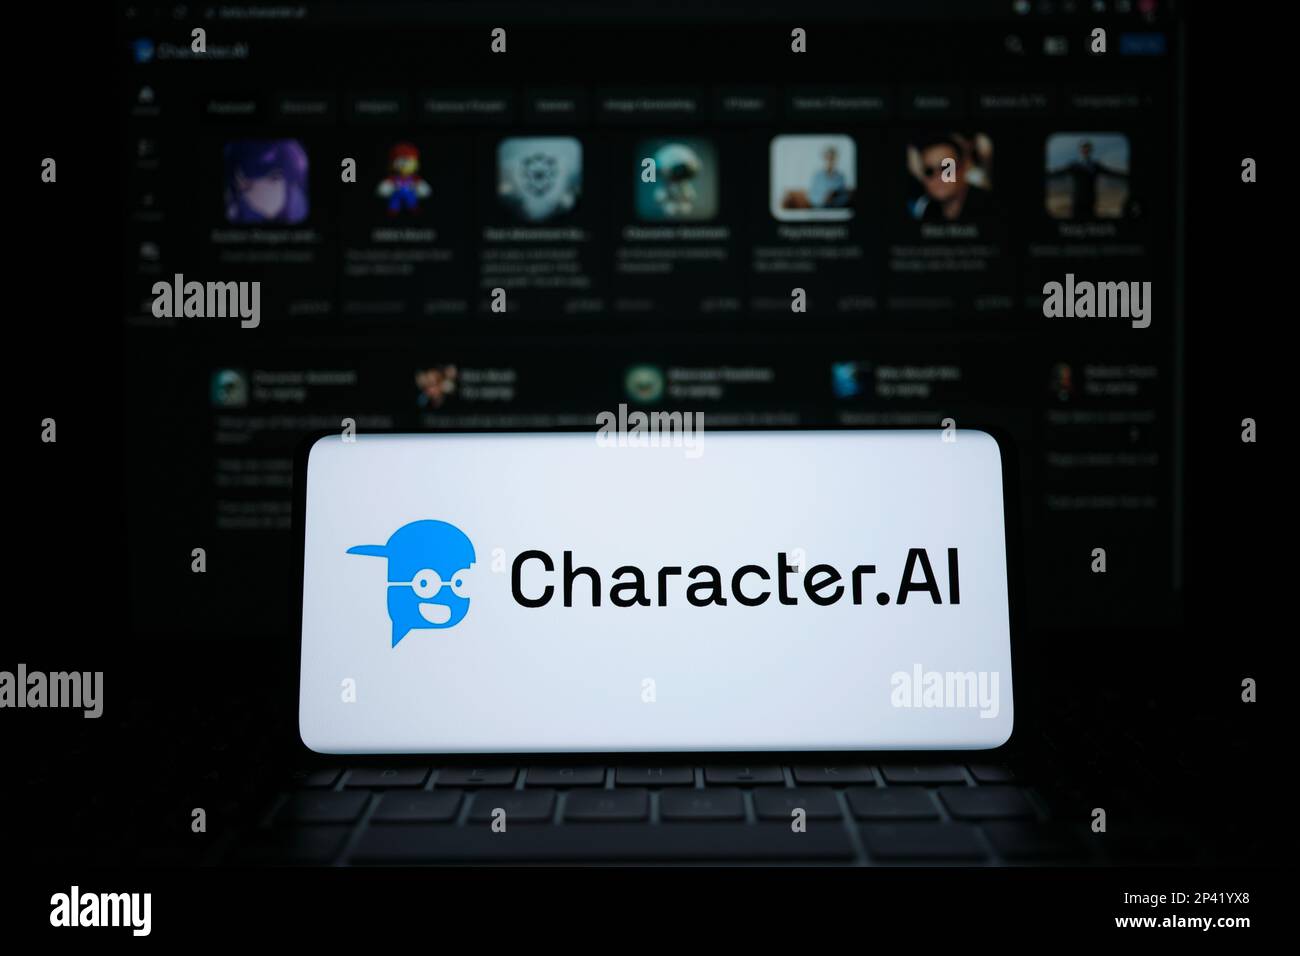 Character AI logotype seen on smartphone screen. Blurred Character.AI website on the background. Stafford, UK, March 5, 2023 Stock Photo